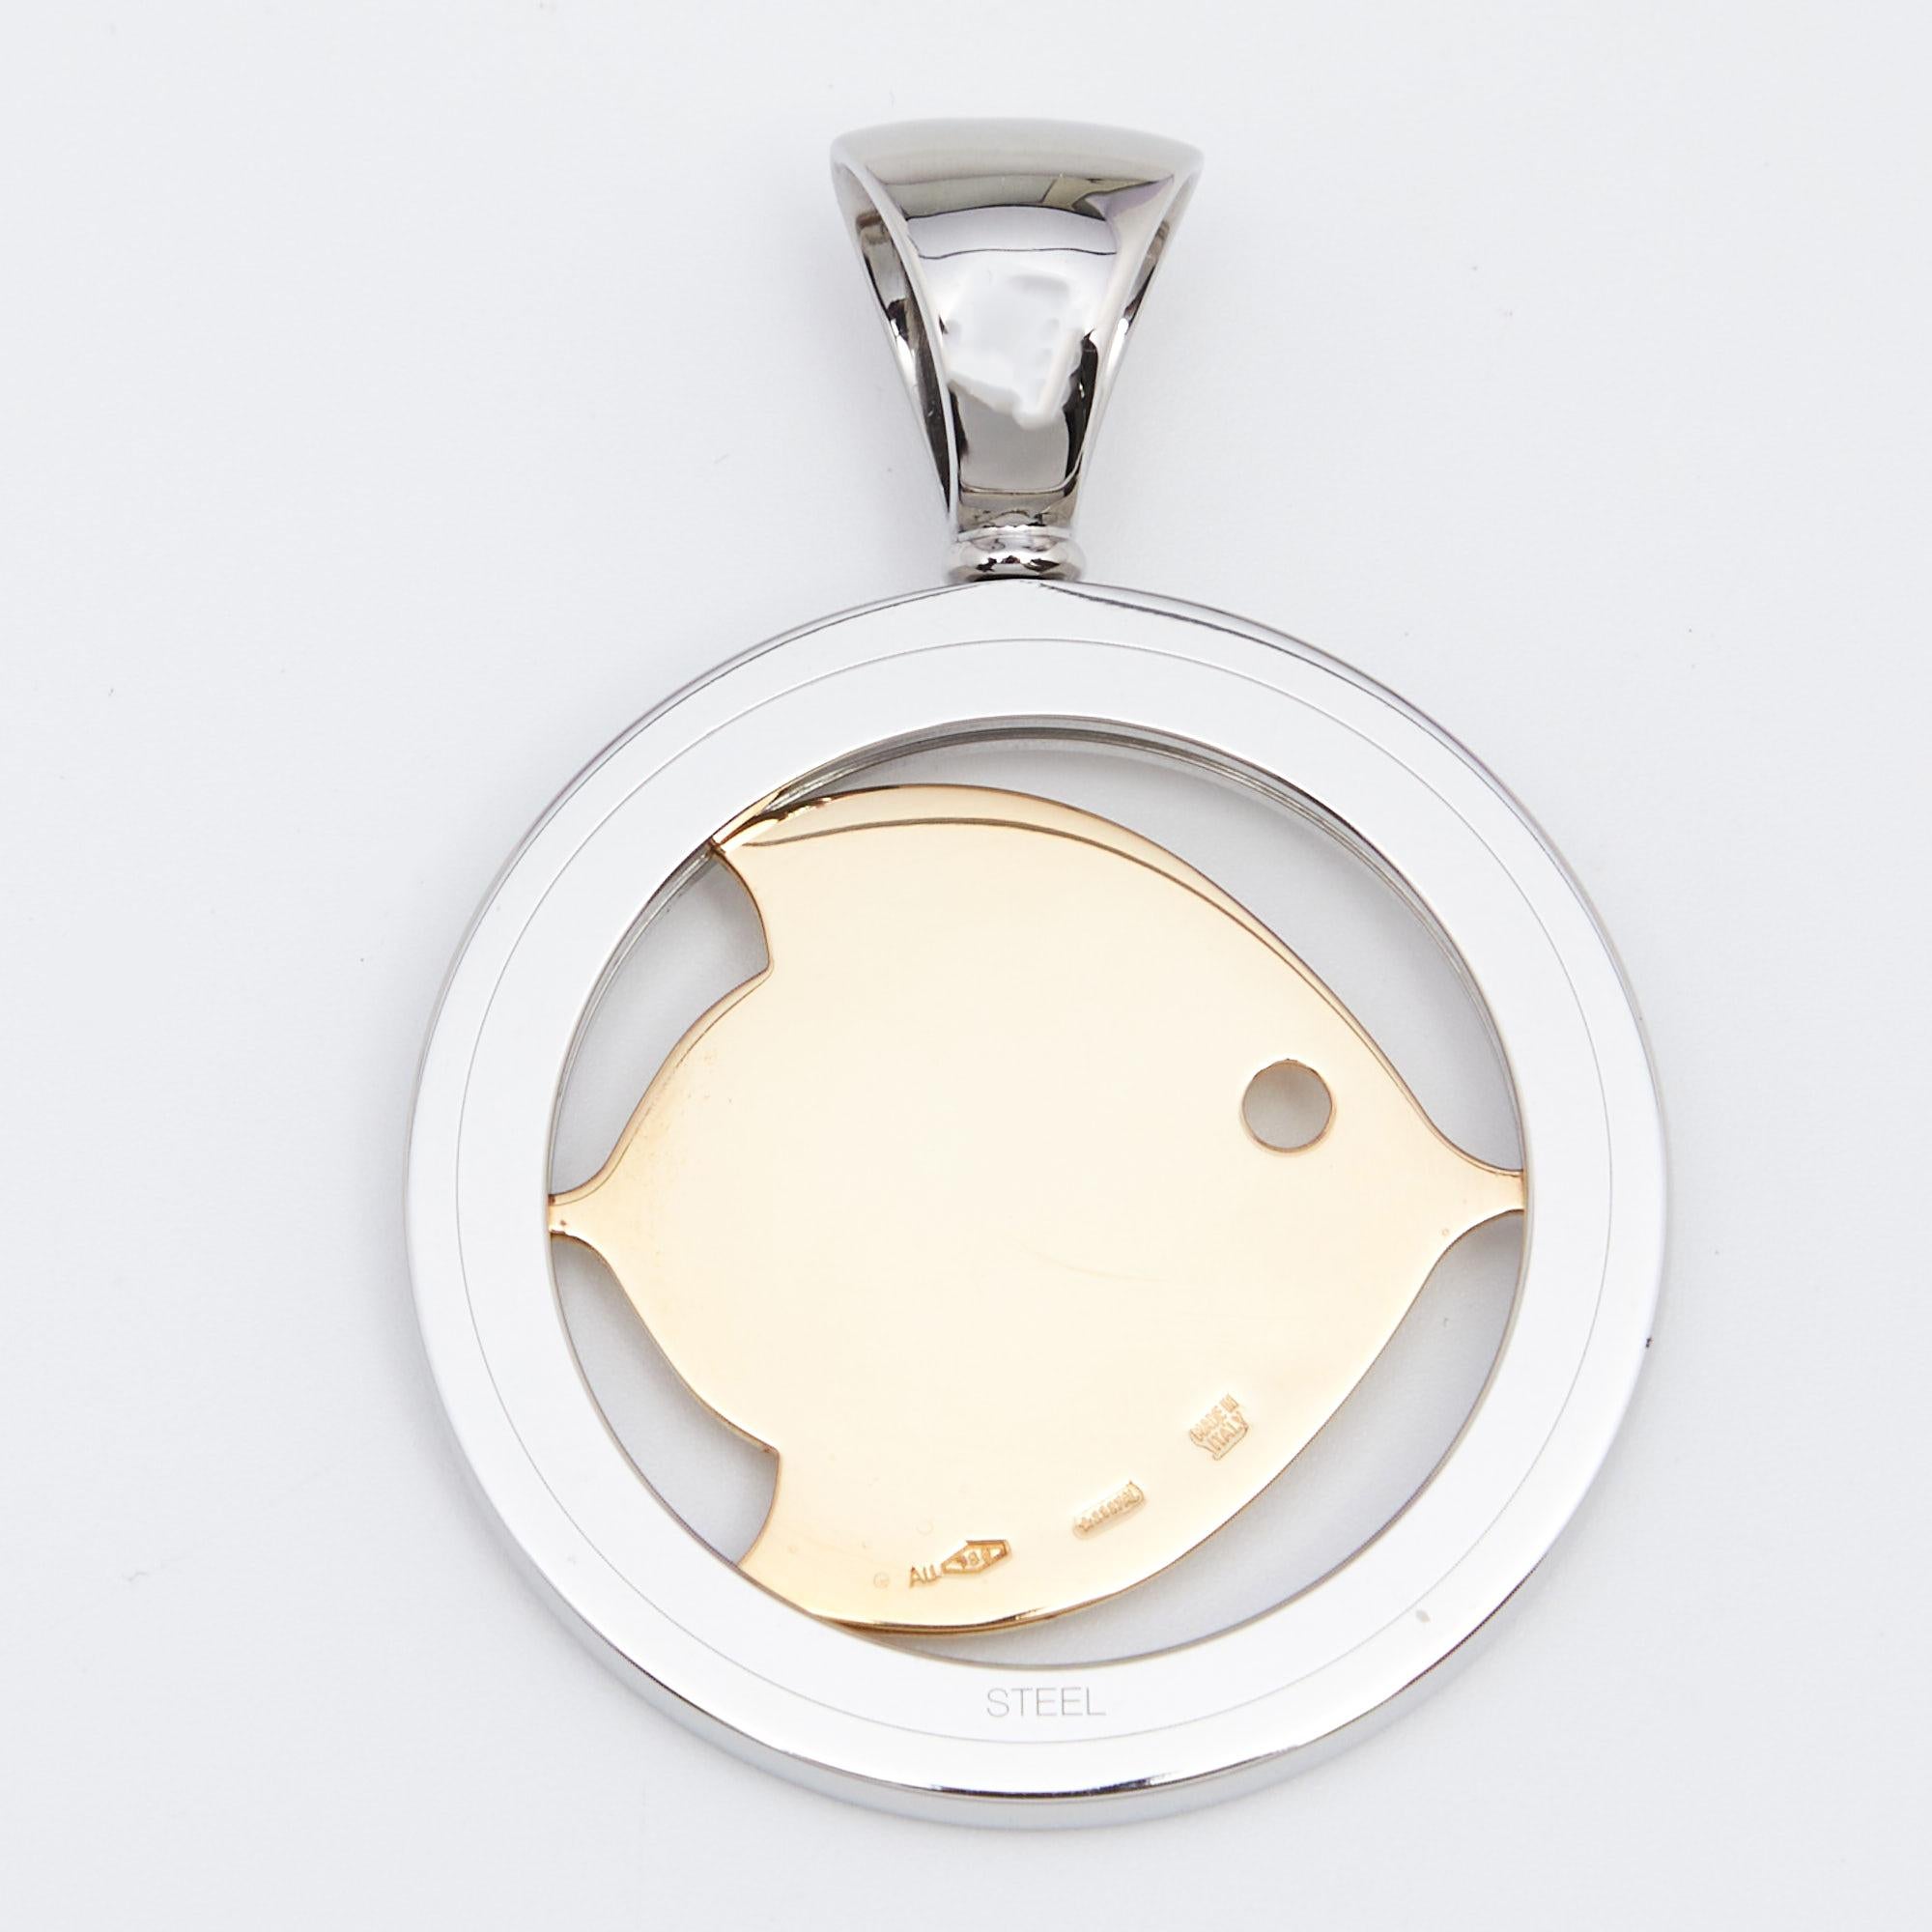 Weighing 11.91 grams, this pendant from Bvlgari is versatile as it comes with a bail that allows you to attach it to chains and cords. It has been crafted from stainless steel in a circular shape and added with an 18k yellow gold fish motif and logo